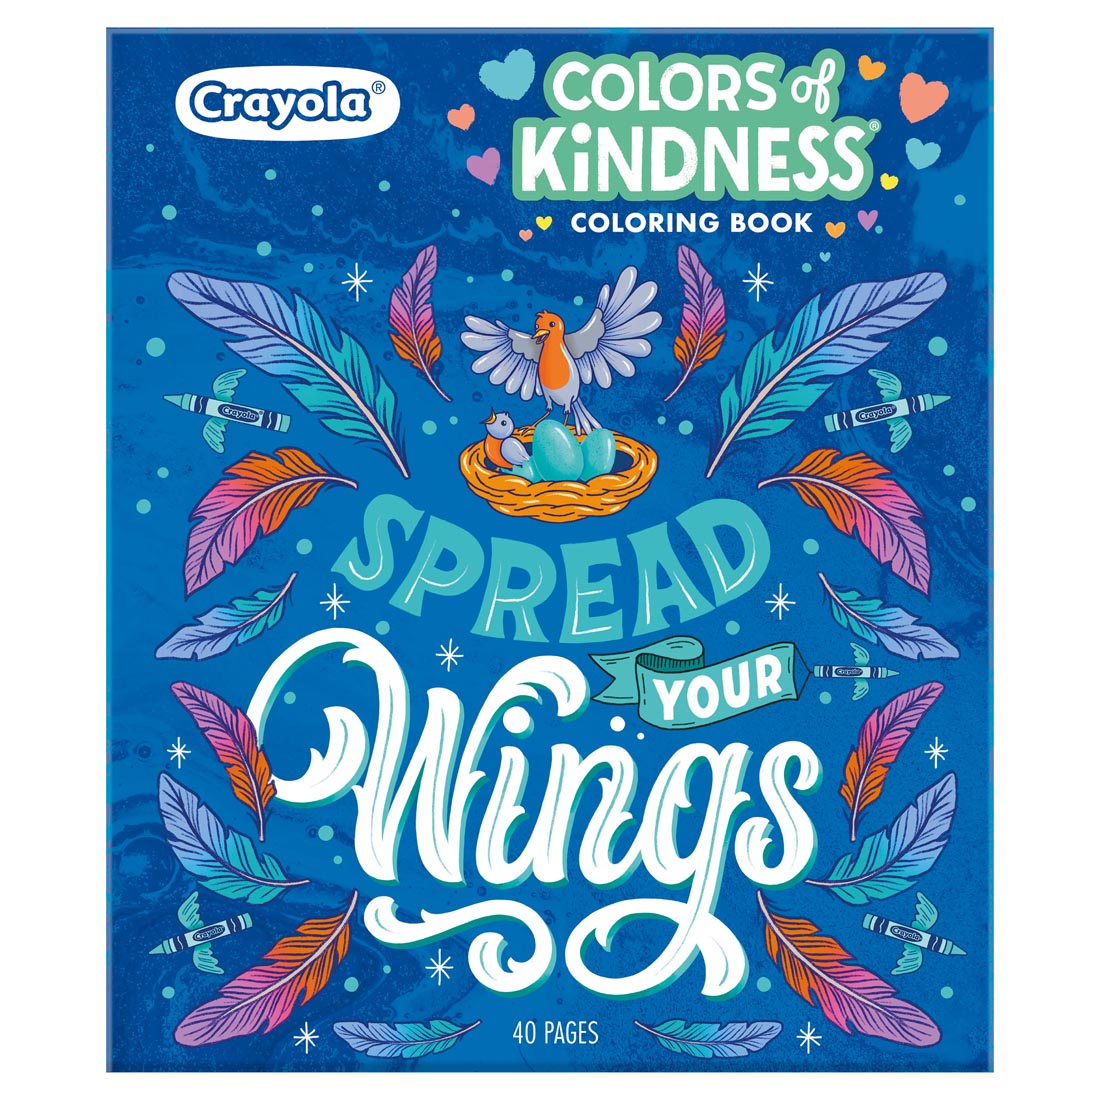 front cover of the Crayola Spread Your Wings Colors of Kindness Coloring Book